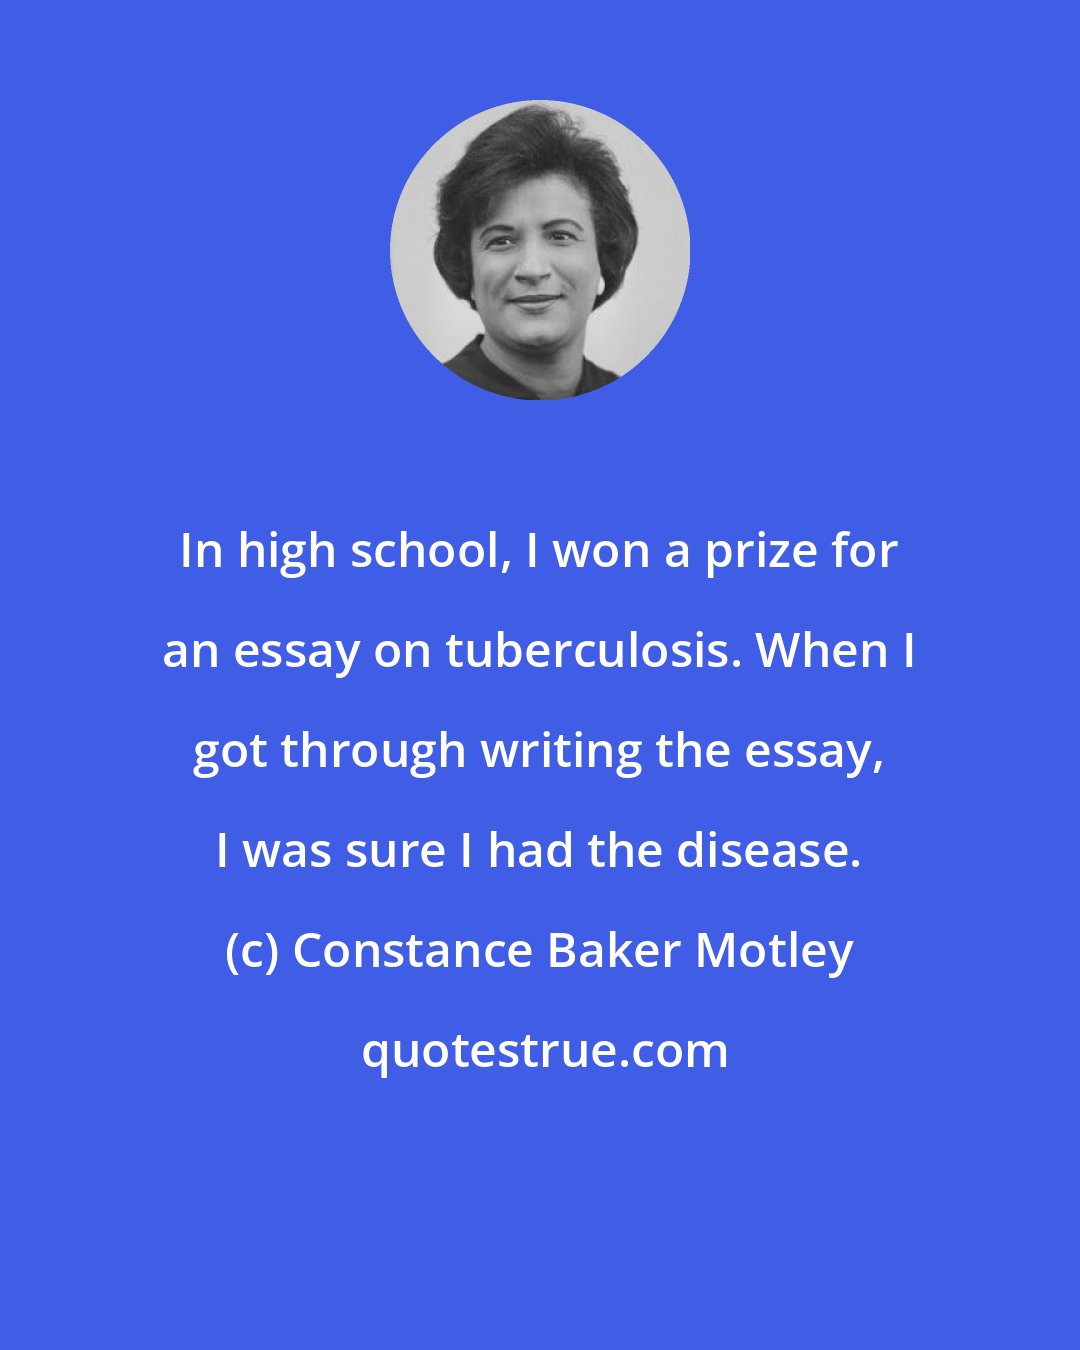 Constance Baker Motley: In high school, I won a prize for an essay on tuberculosis. When I got through writing the essay, I was sure I had the disease.